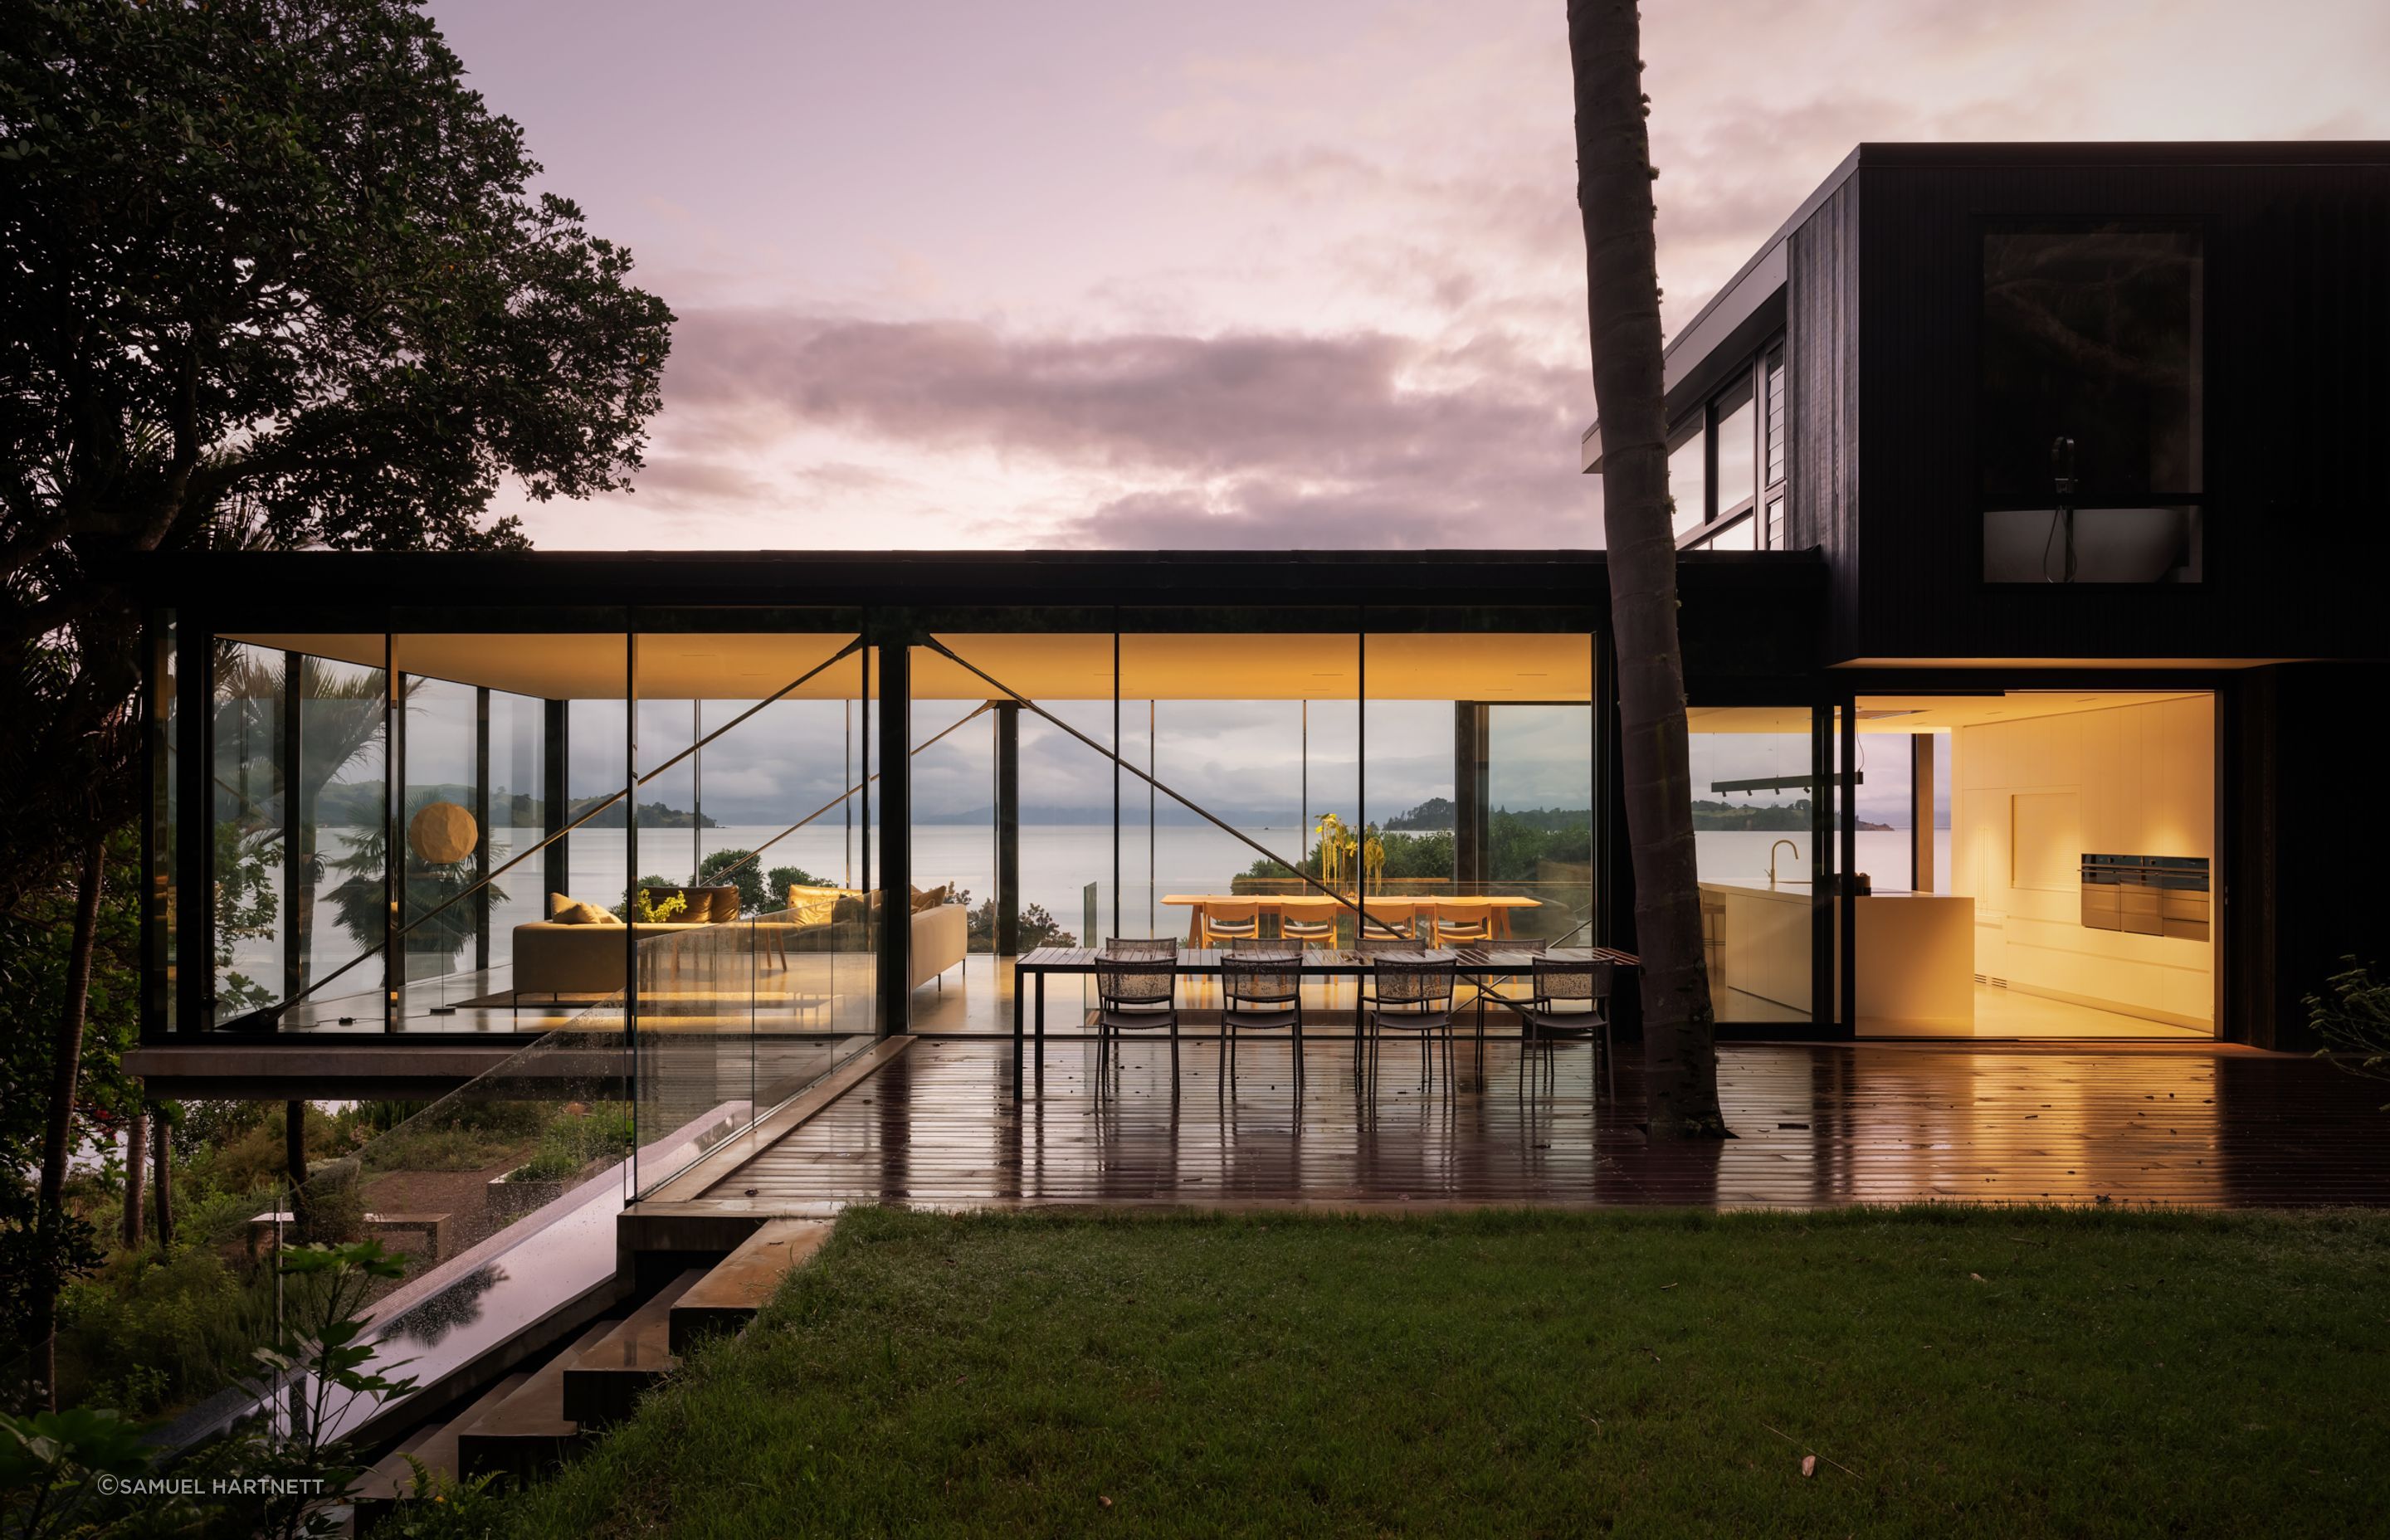 The holiday home on Waiheke Island is one of three in the area designed by Daniel Marshall of Daniel Marshall Architects – all owned by a group of friends. The family has university-aged children and lives in the UK.